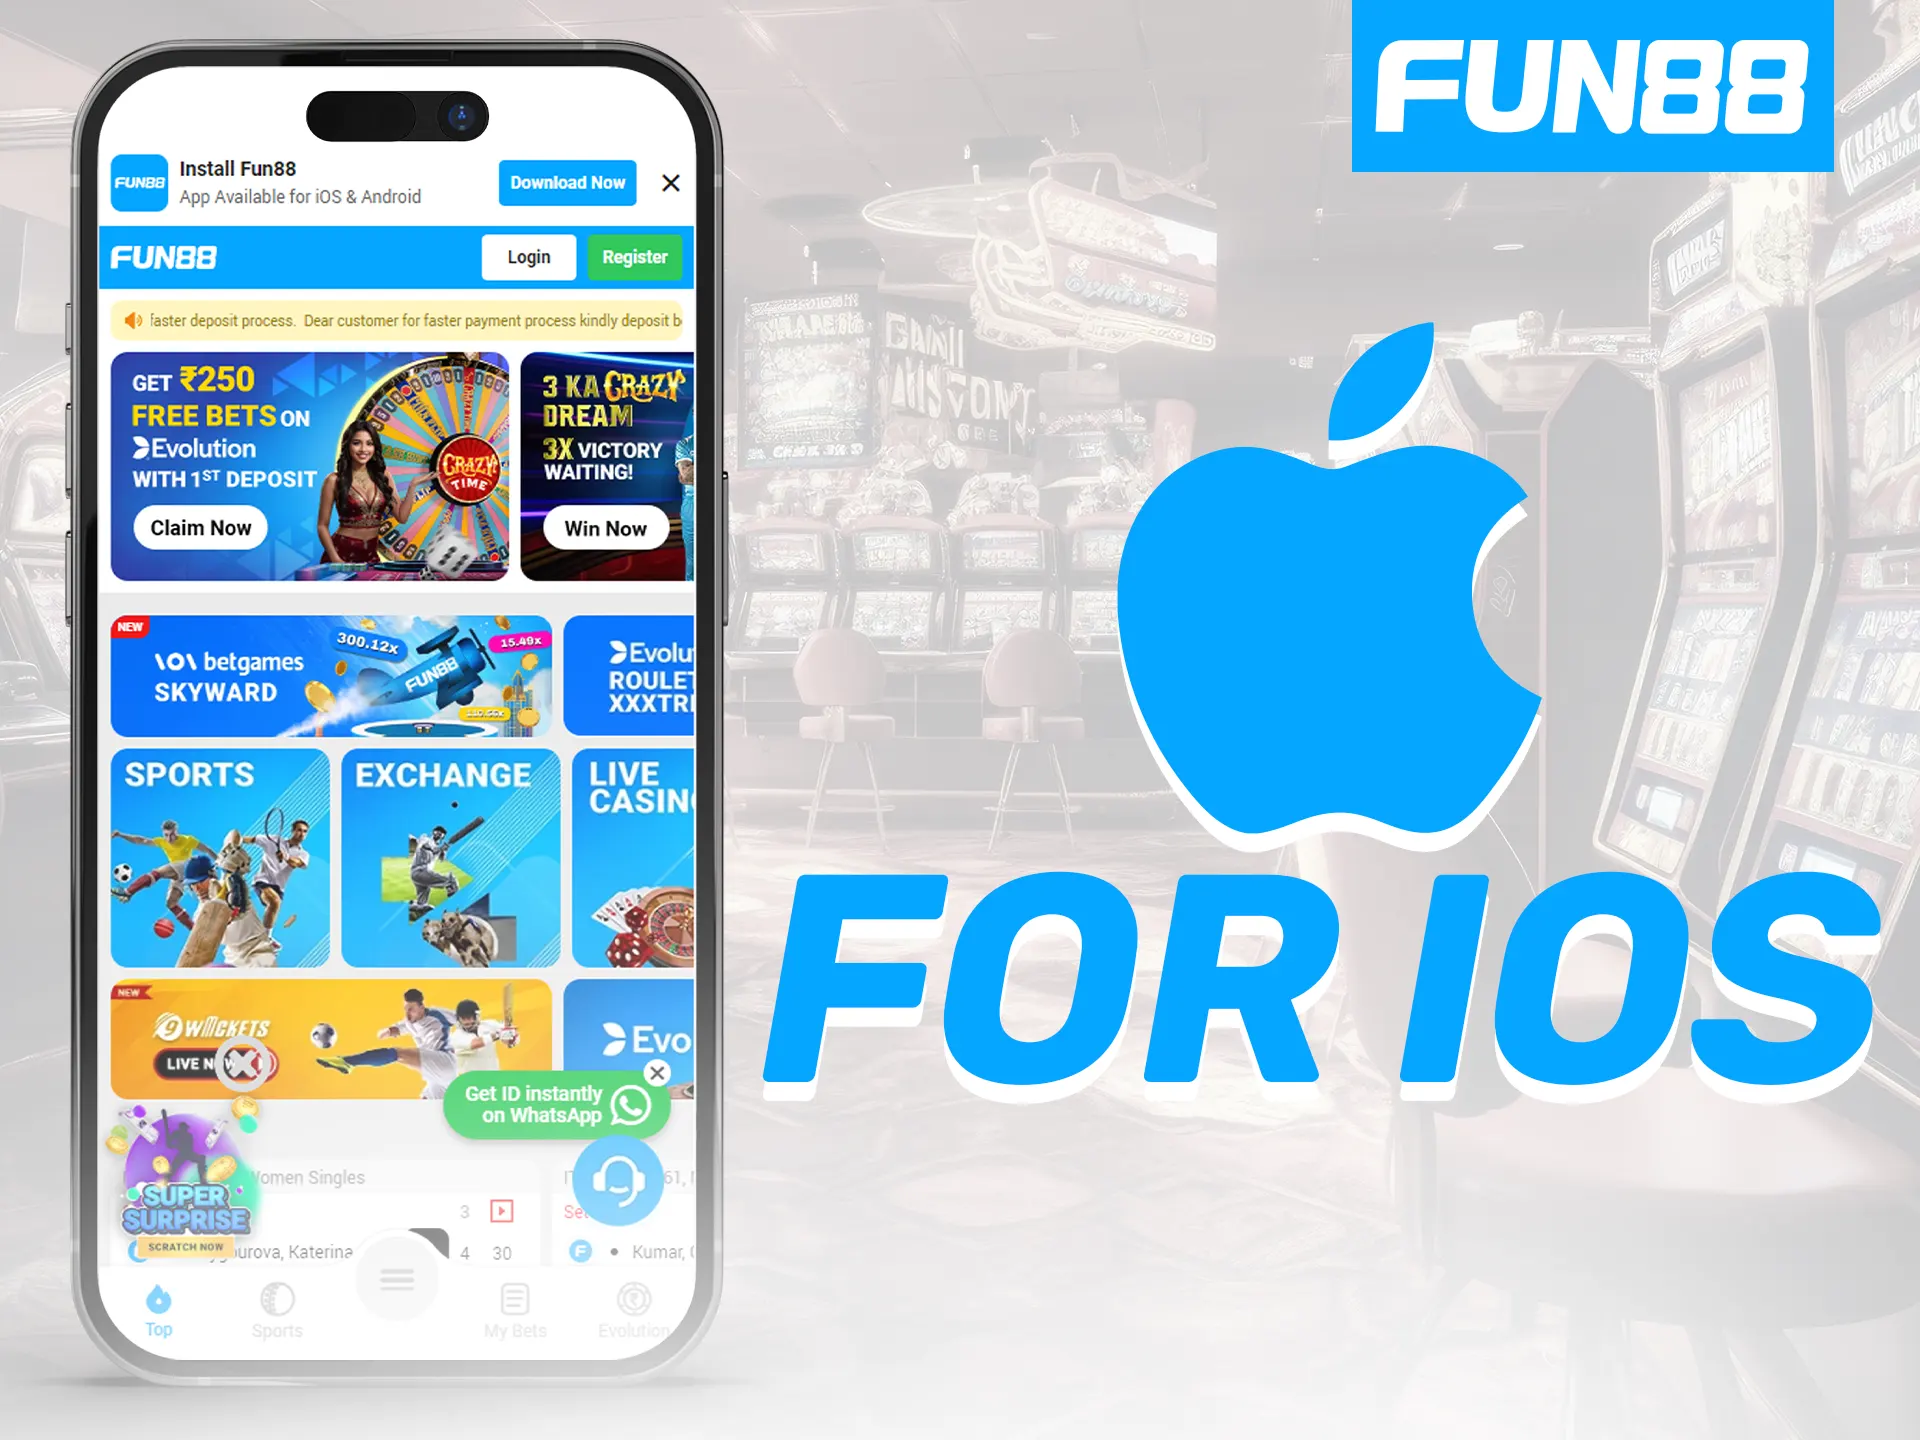 iOS users can freely download the Fun88 app from the official website.